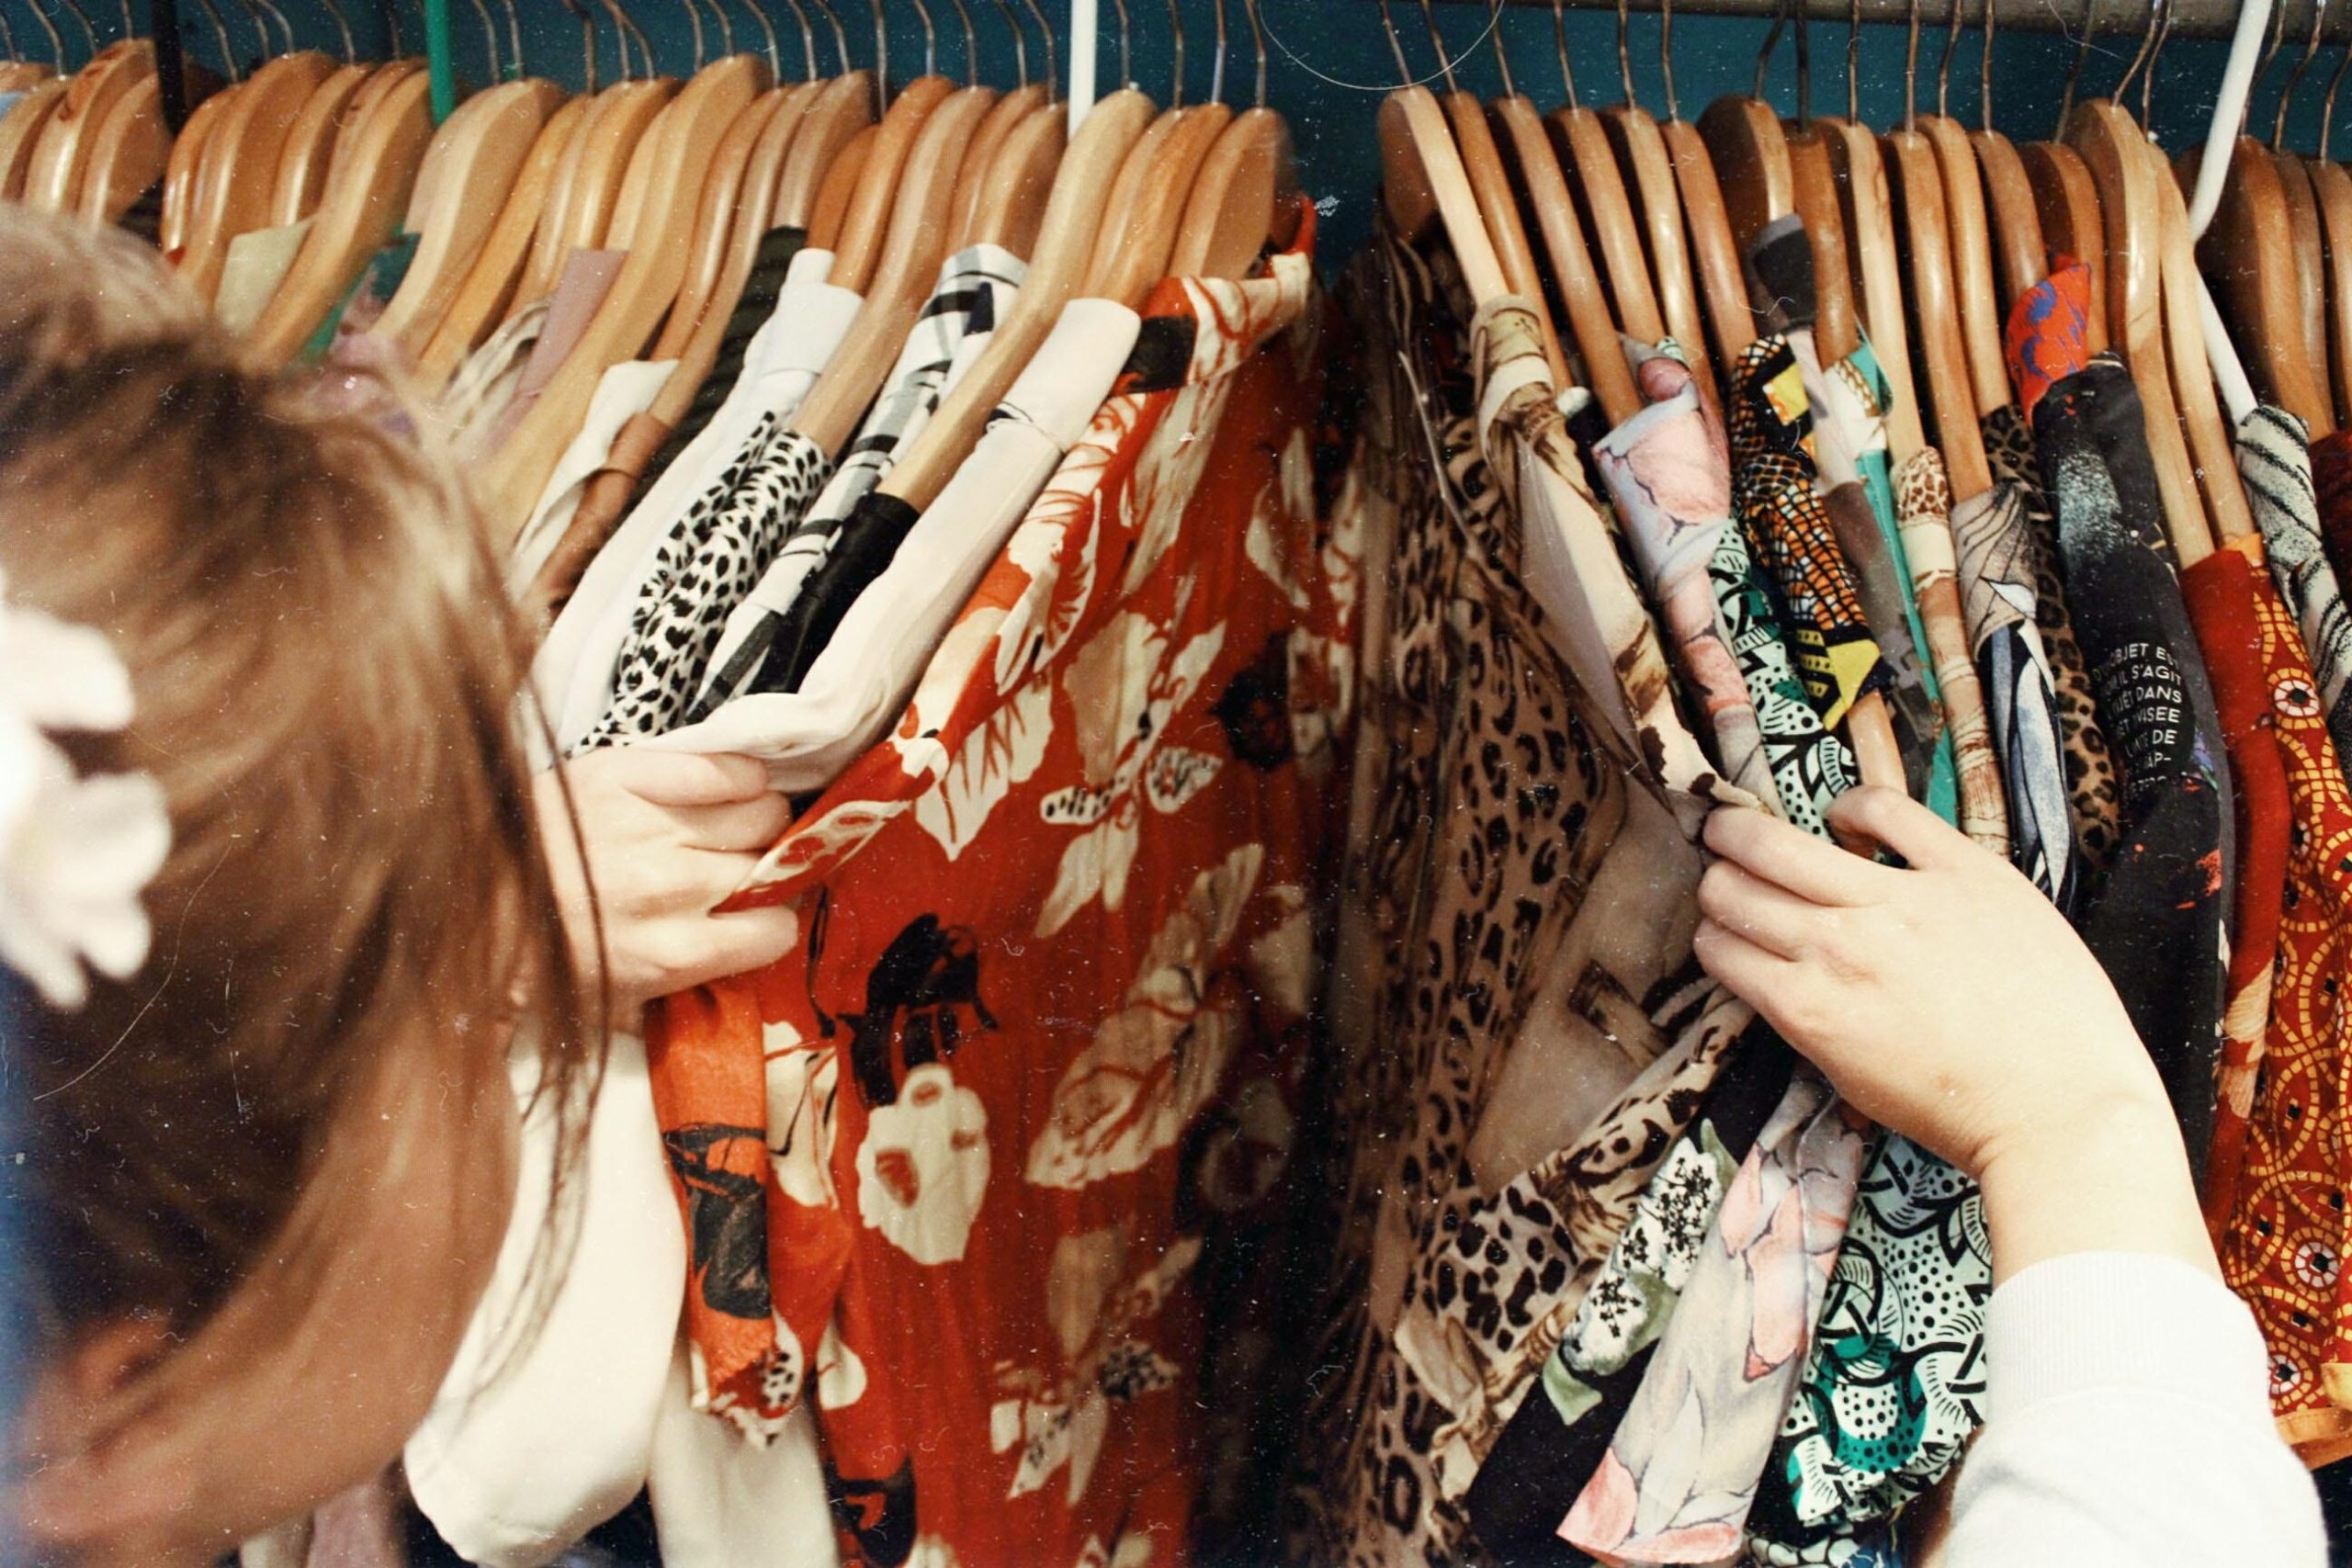 The Conscious Consumer: Is Thrifting Actually Ethical?